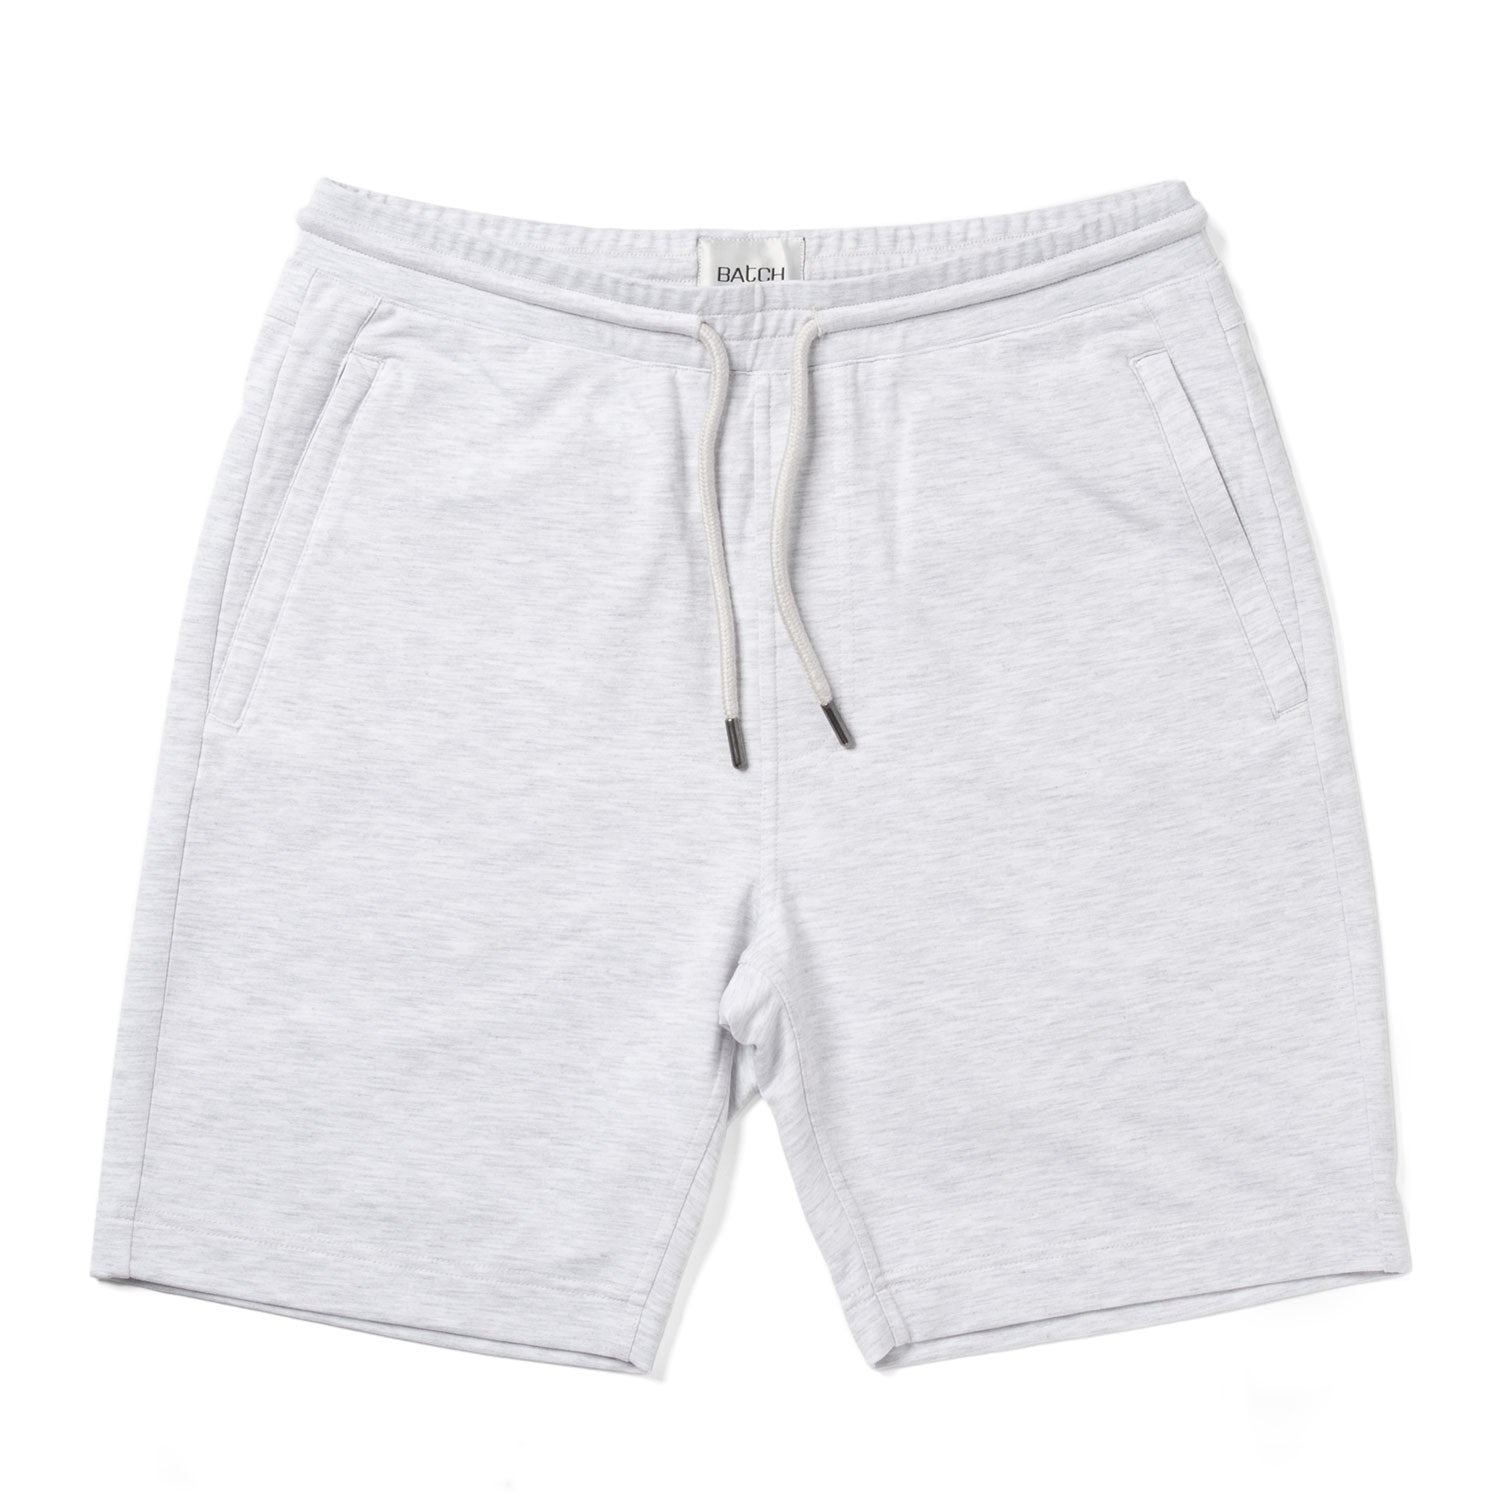 Men's Casual Essential Short in Light Gray Cotton French Terry | Batch